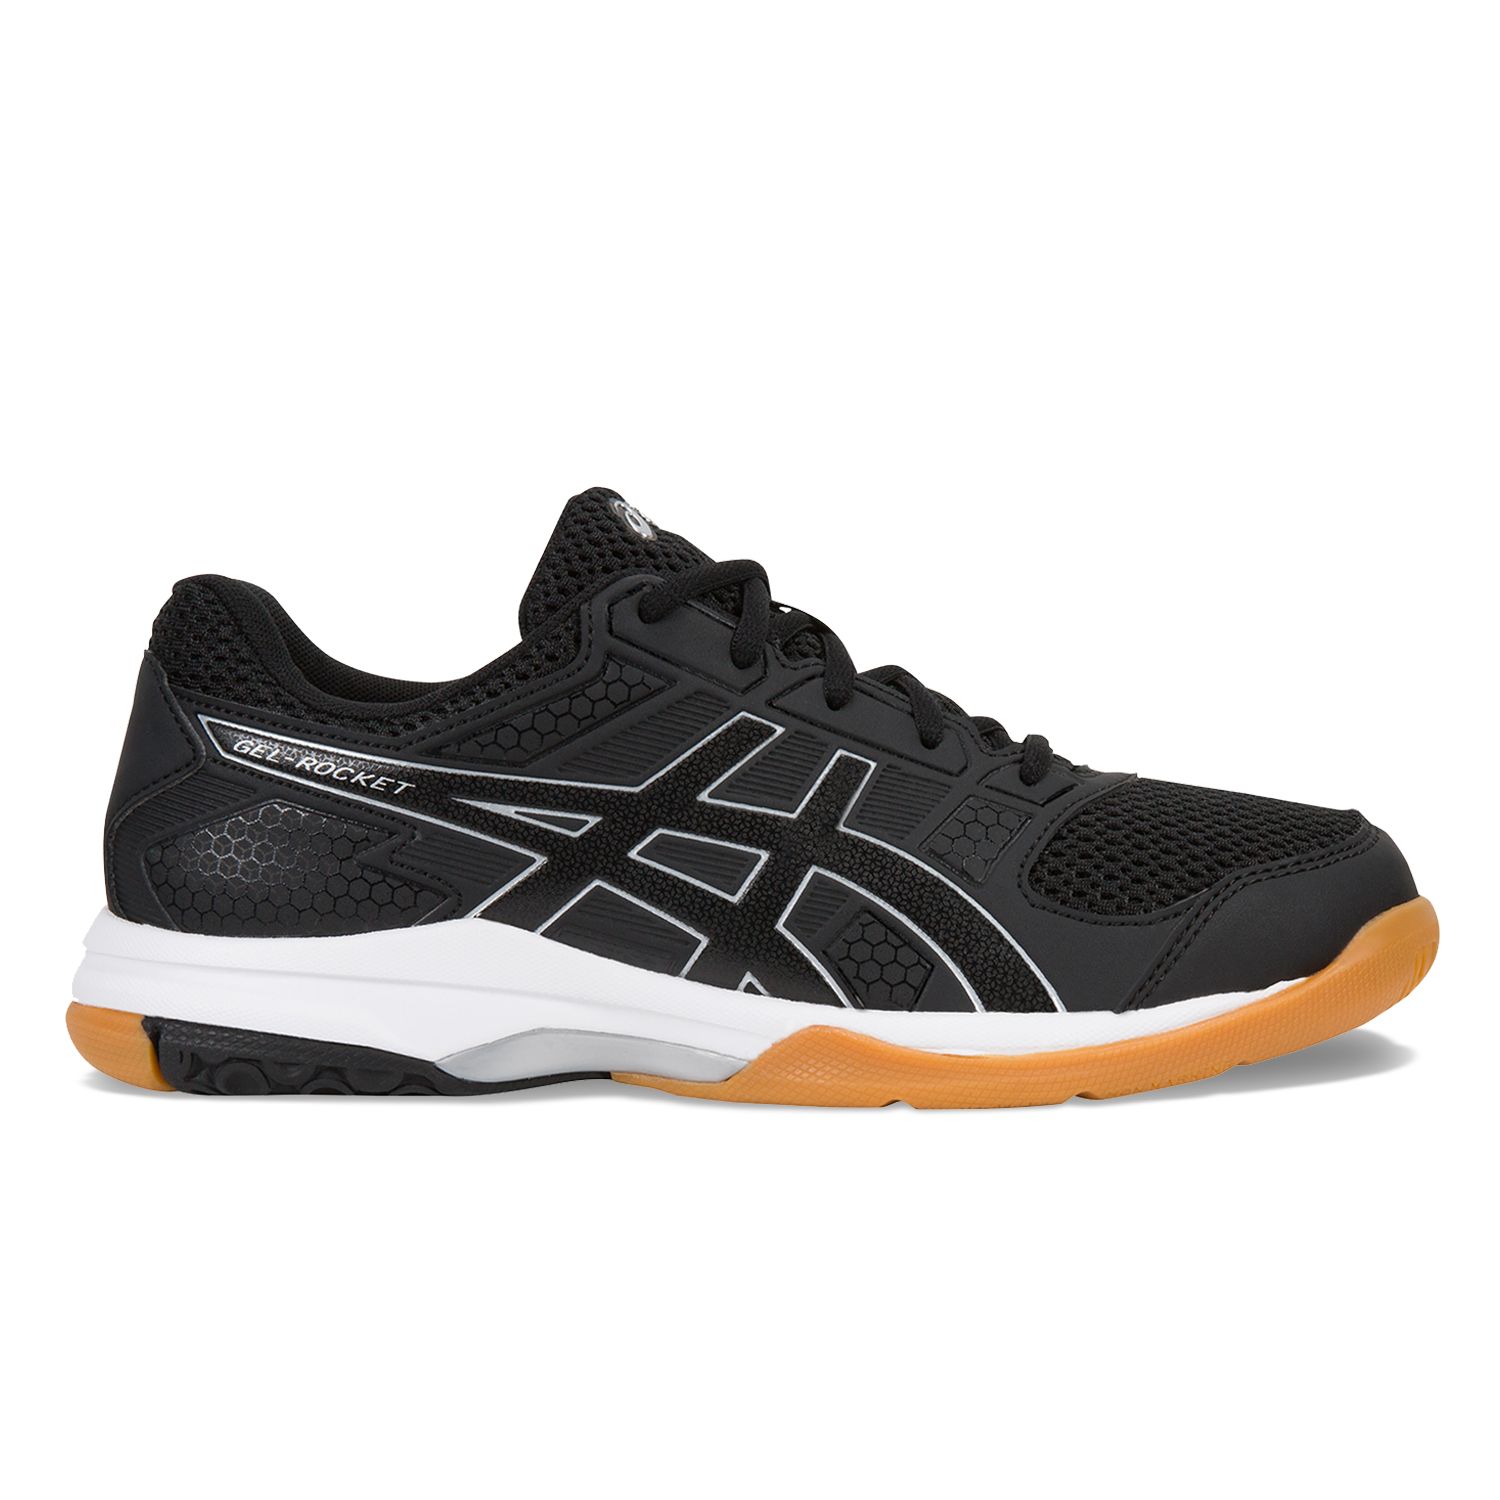 asics black and white volleyball shoes